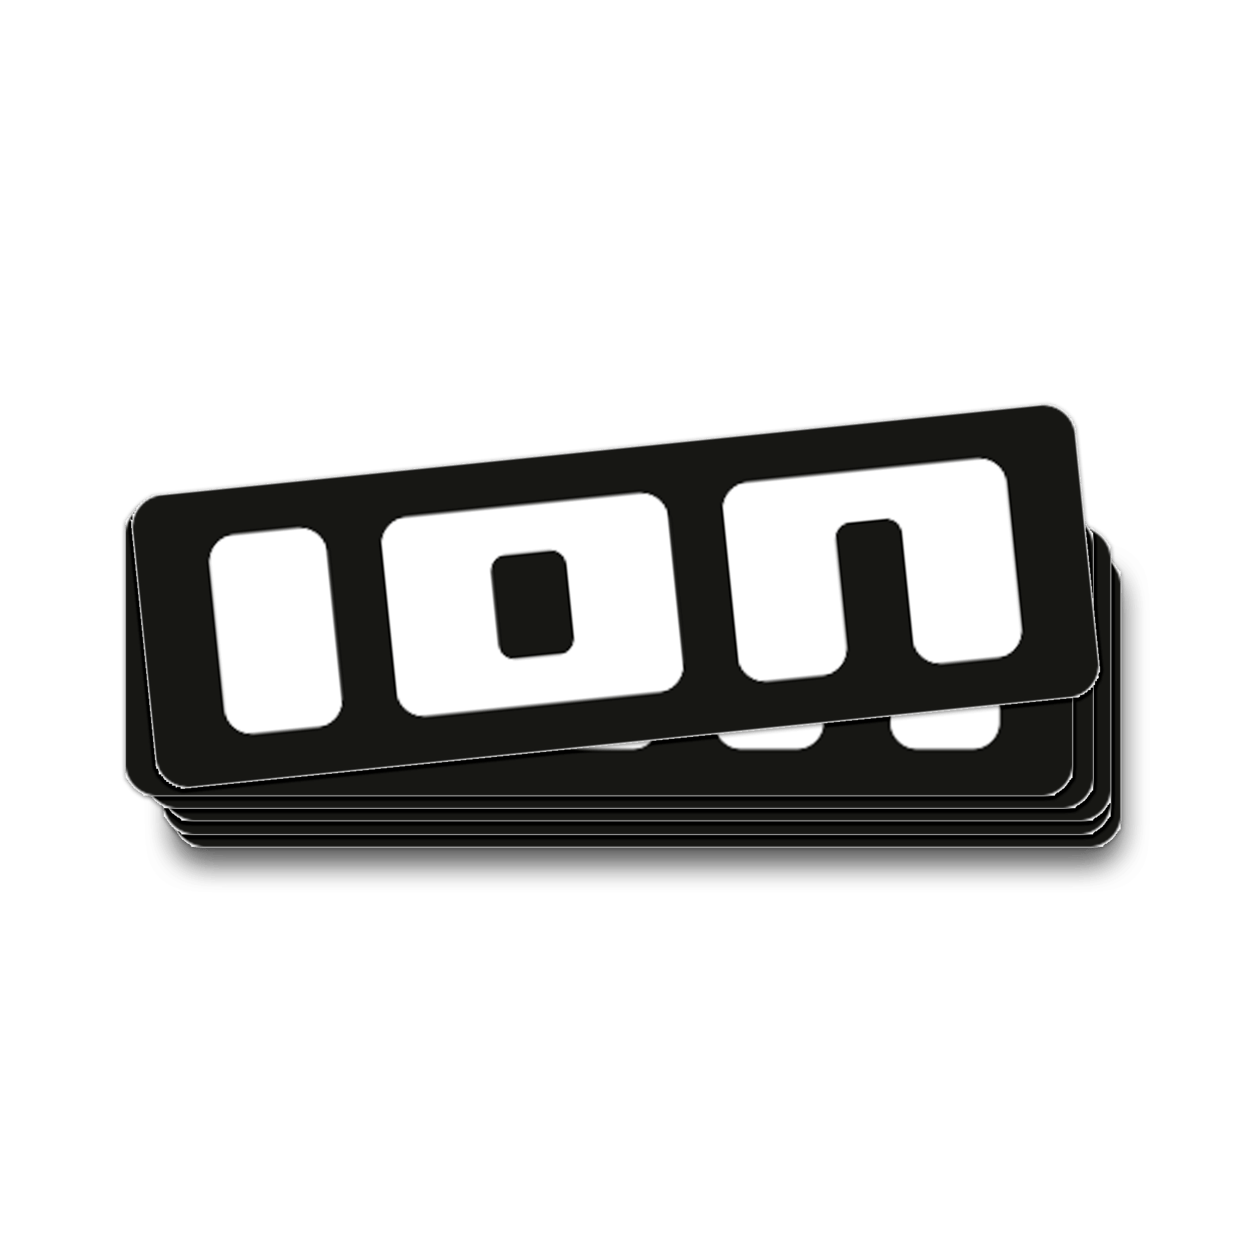 ION Sticker (10pcs) 2022 - Worthing Watersports - 9010583065878 - Promo - ION Water